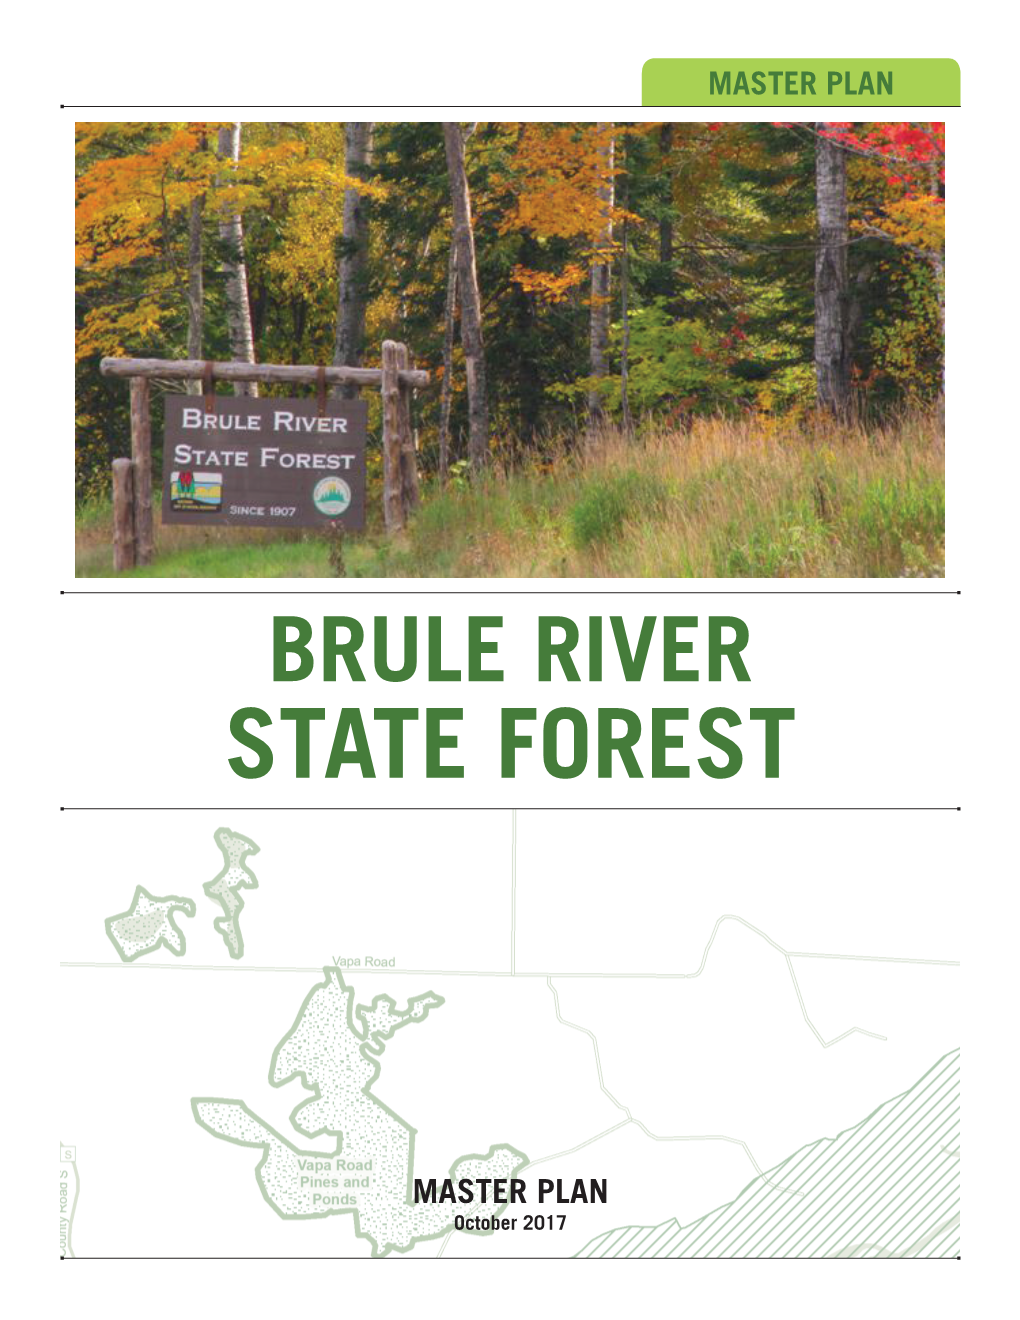 Brule River State Forest